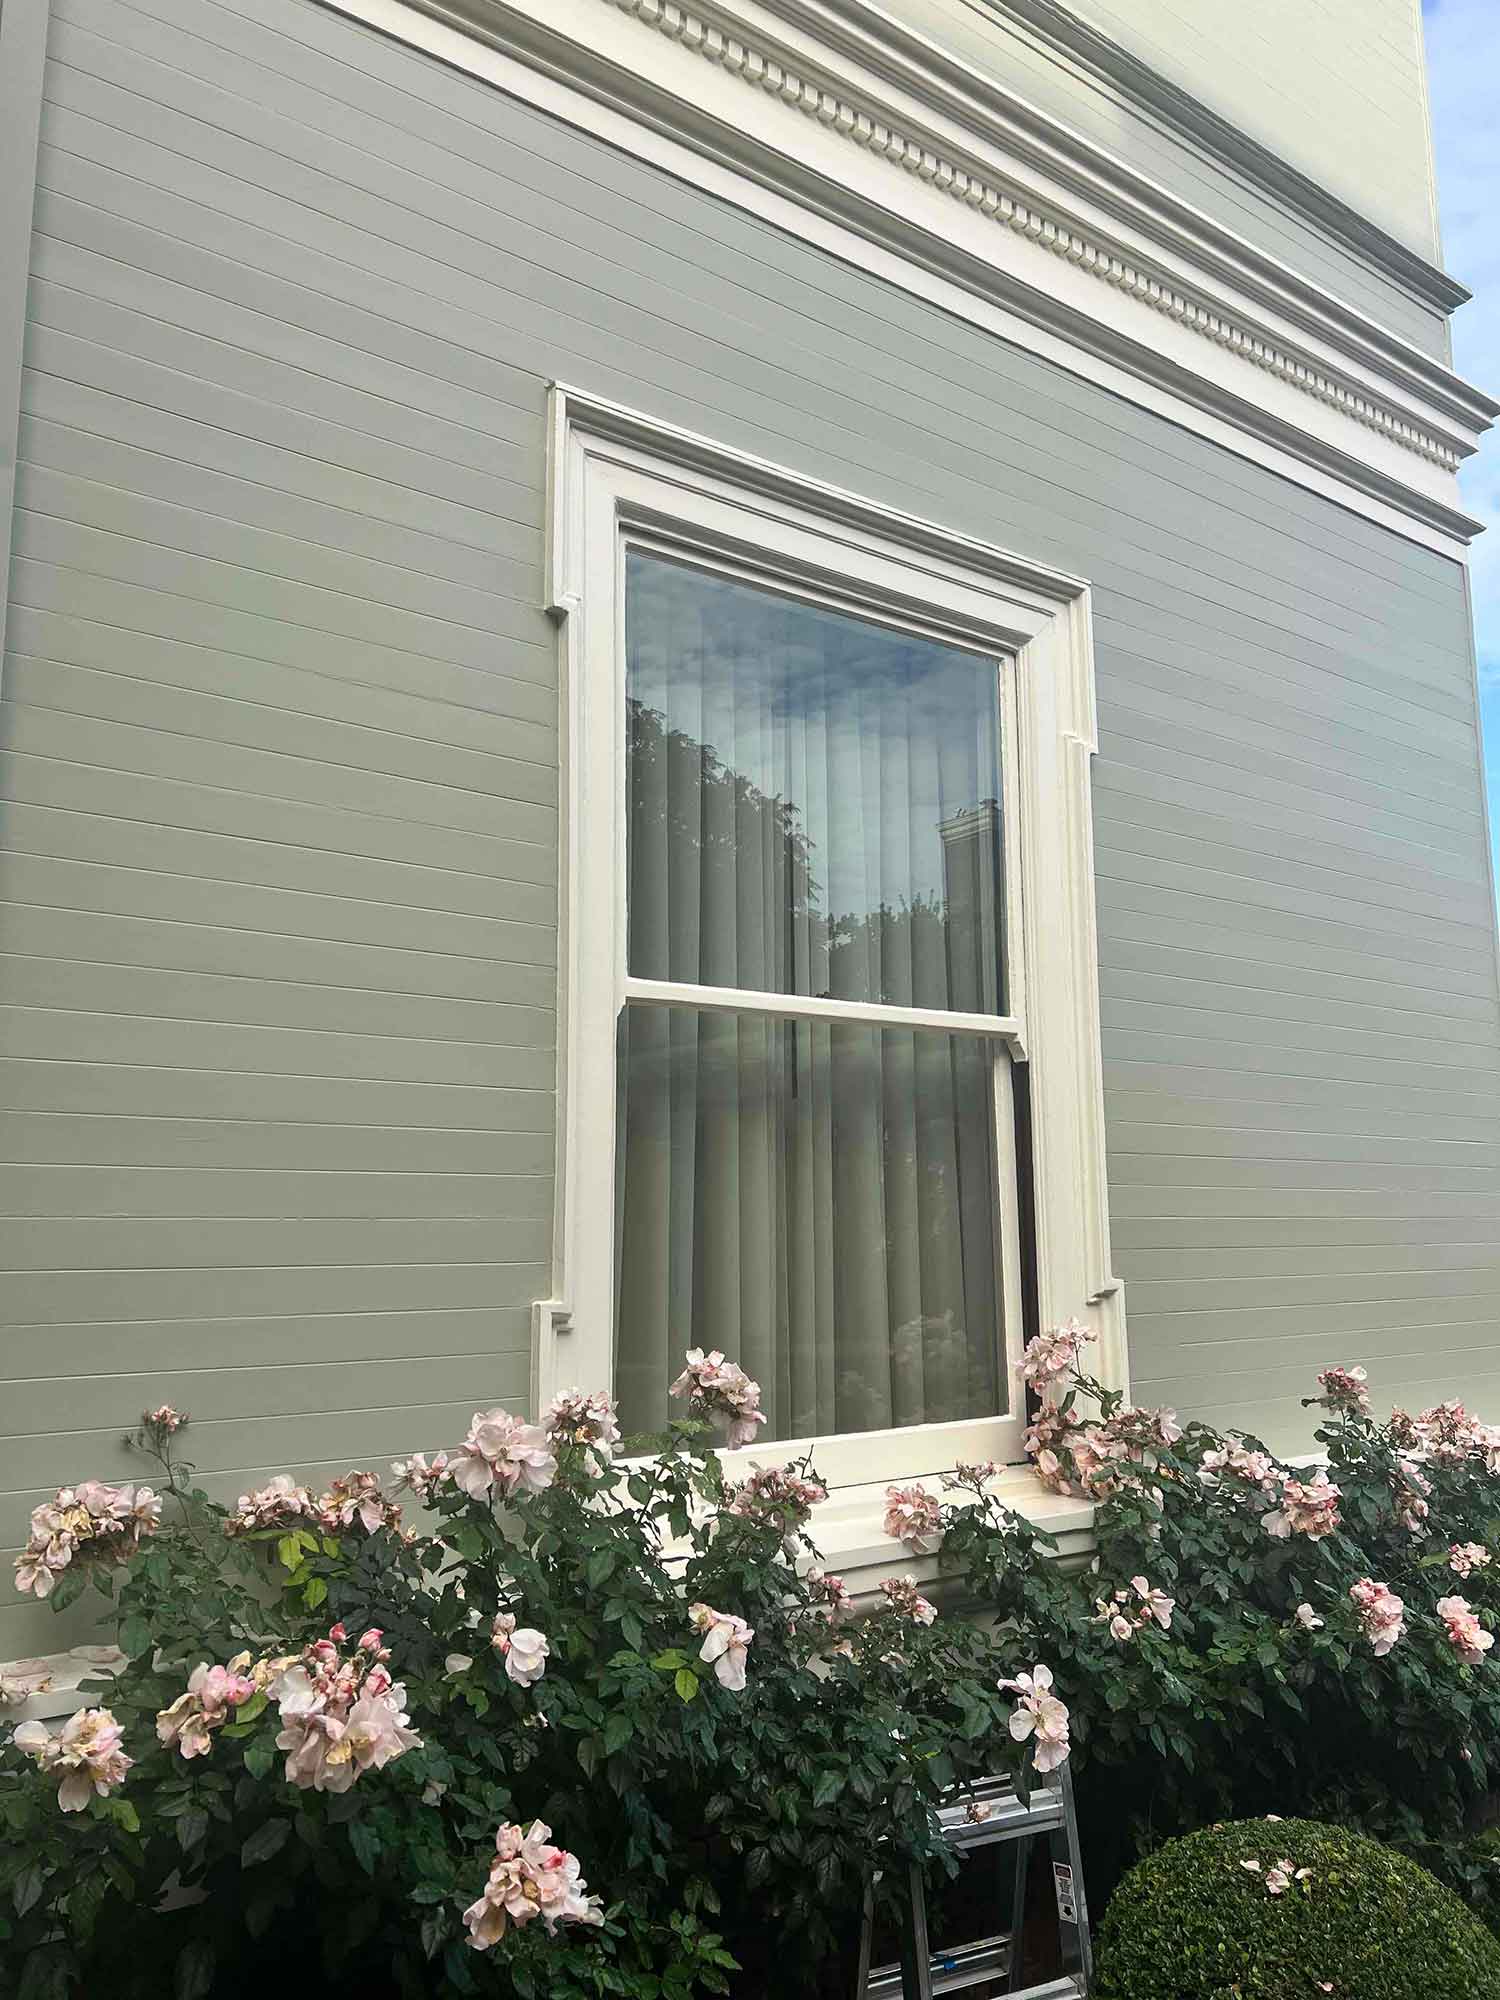 The ClimatePro Team installed 3 different 3M Window Films on this beautiful San Francisco home.